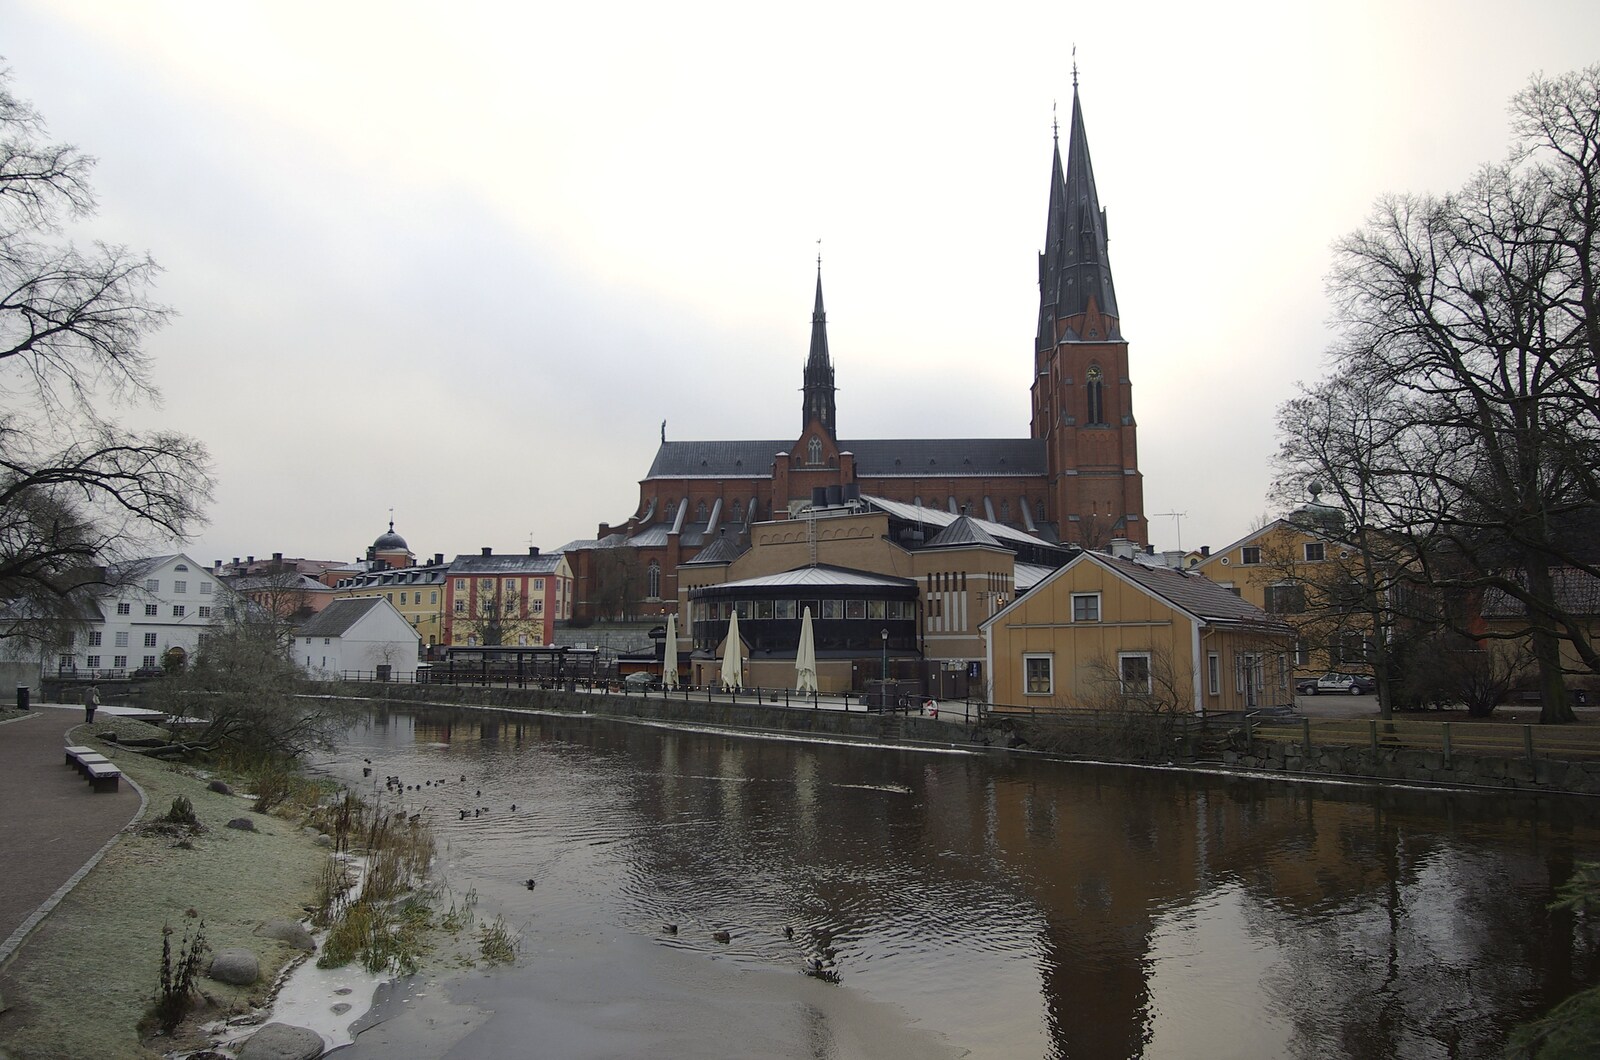 Uppsala's river and cathedral from Gamla Uppsala, Uppsala County, Sweden - 16th December 2007